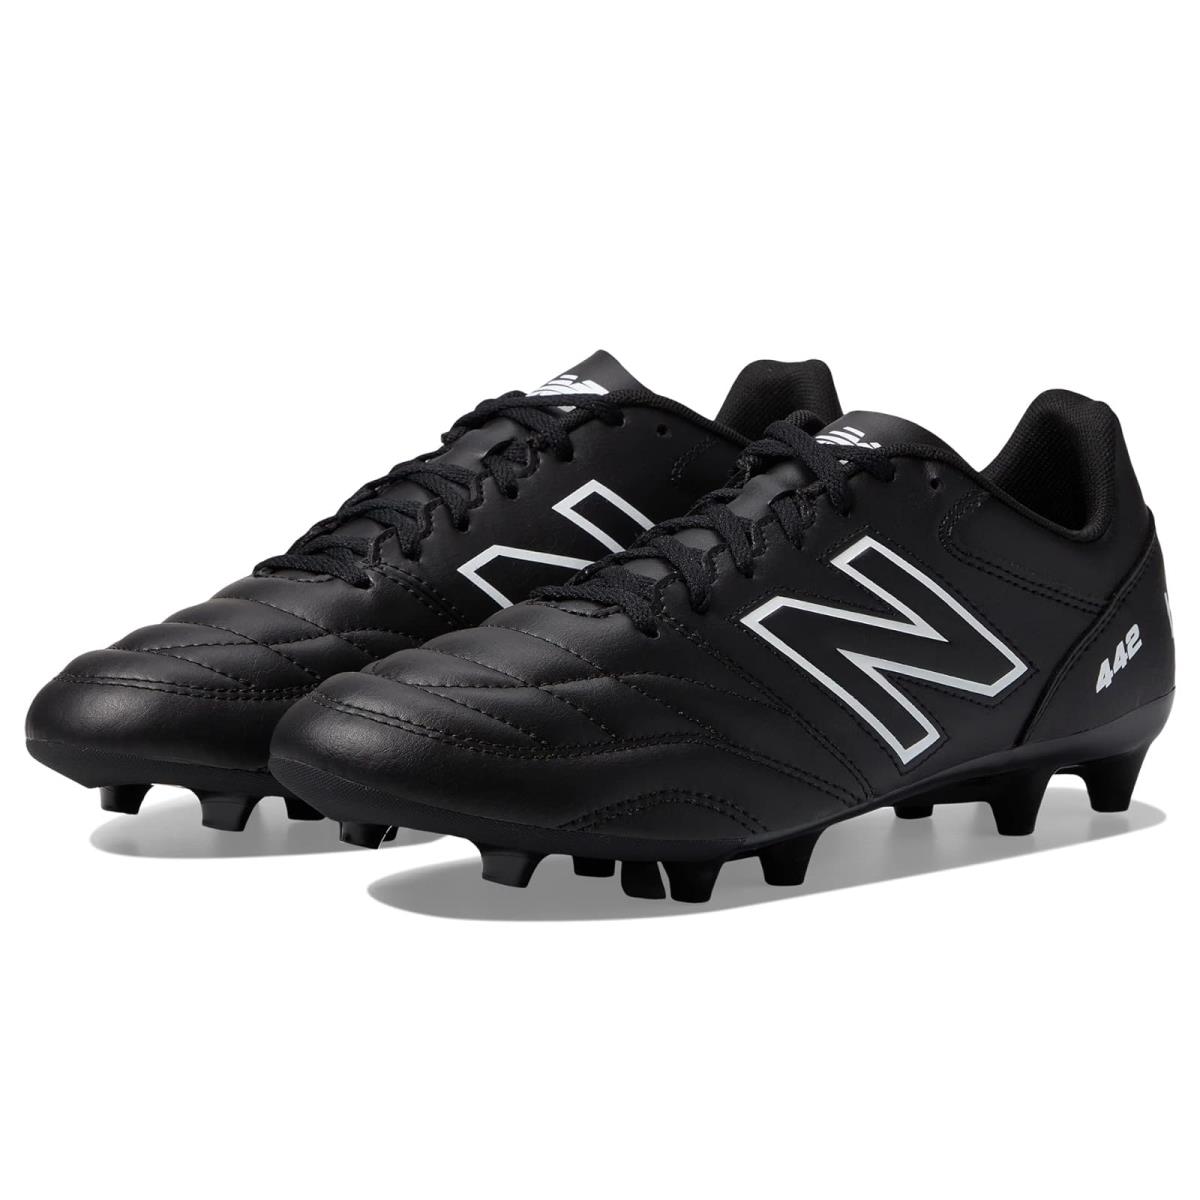 Man`s Sneakers Athletic Shoes New Balance 442 V2 Academy FG Black/White